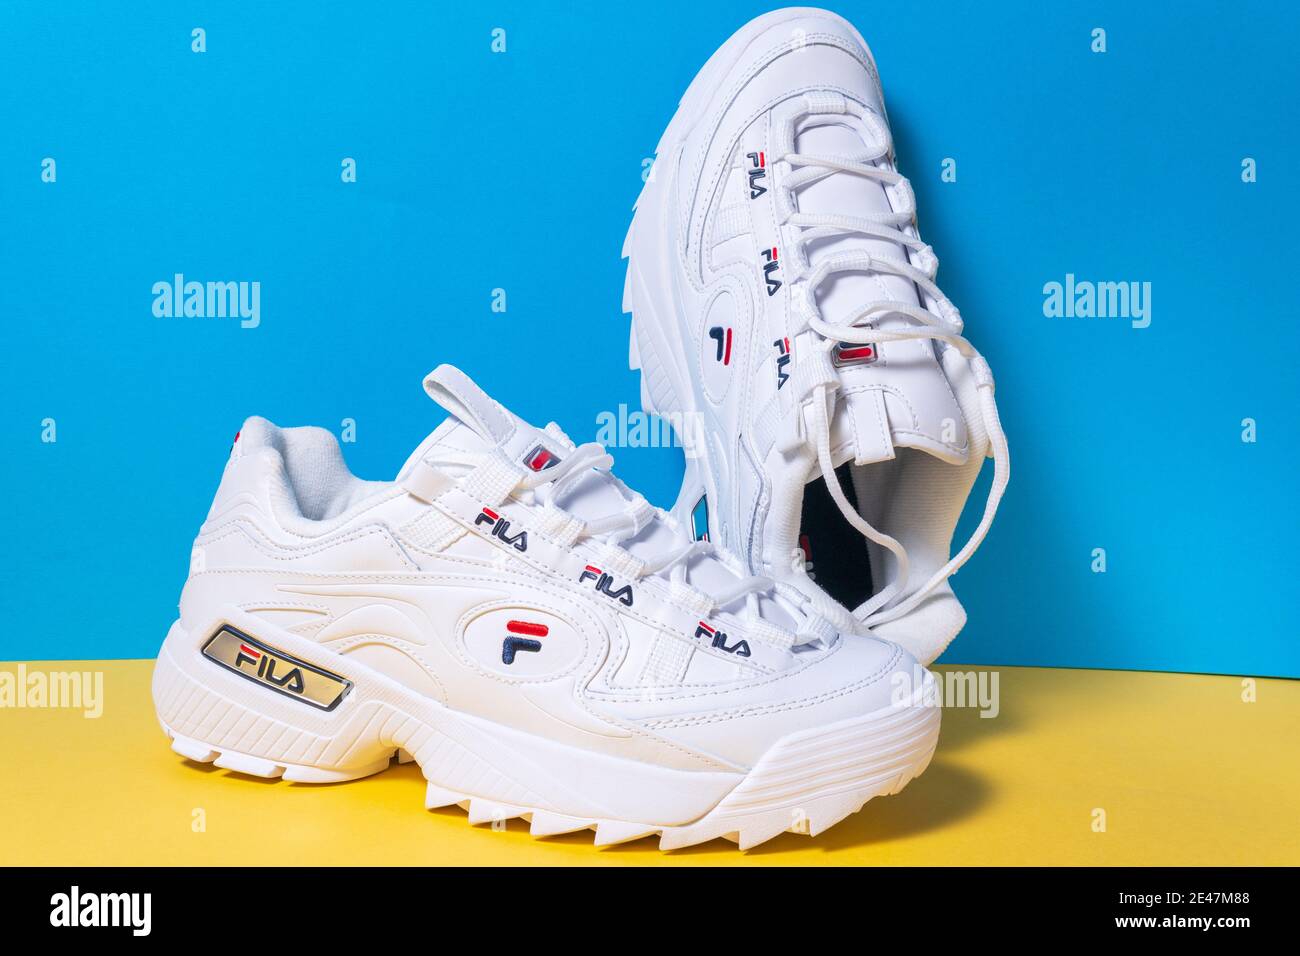 Tyumen, Russia-November 27, 2020: FILA sports shoes sneakers, intense  colors on a multi-colored background Stock Photo - Alamy